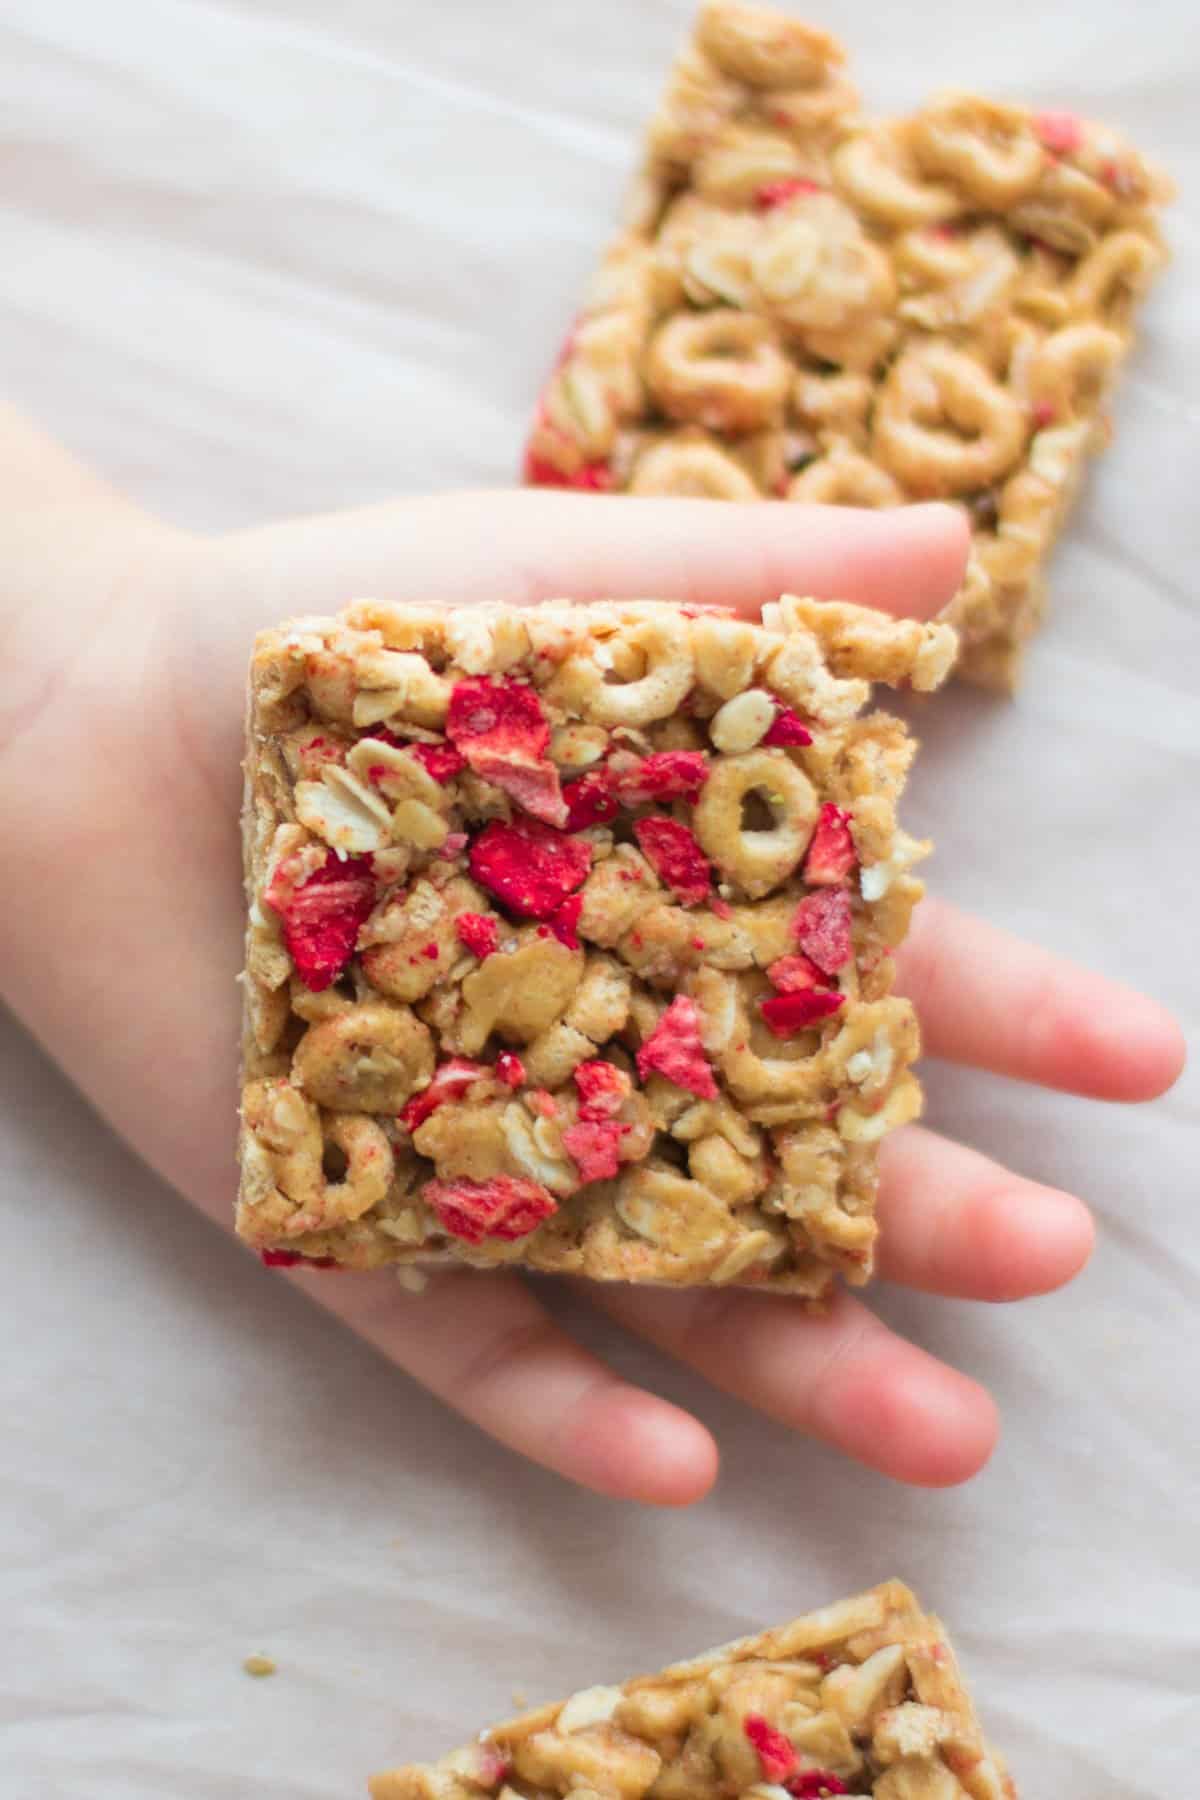 a square cereal bar placed on toddler's palm.